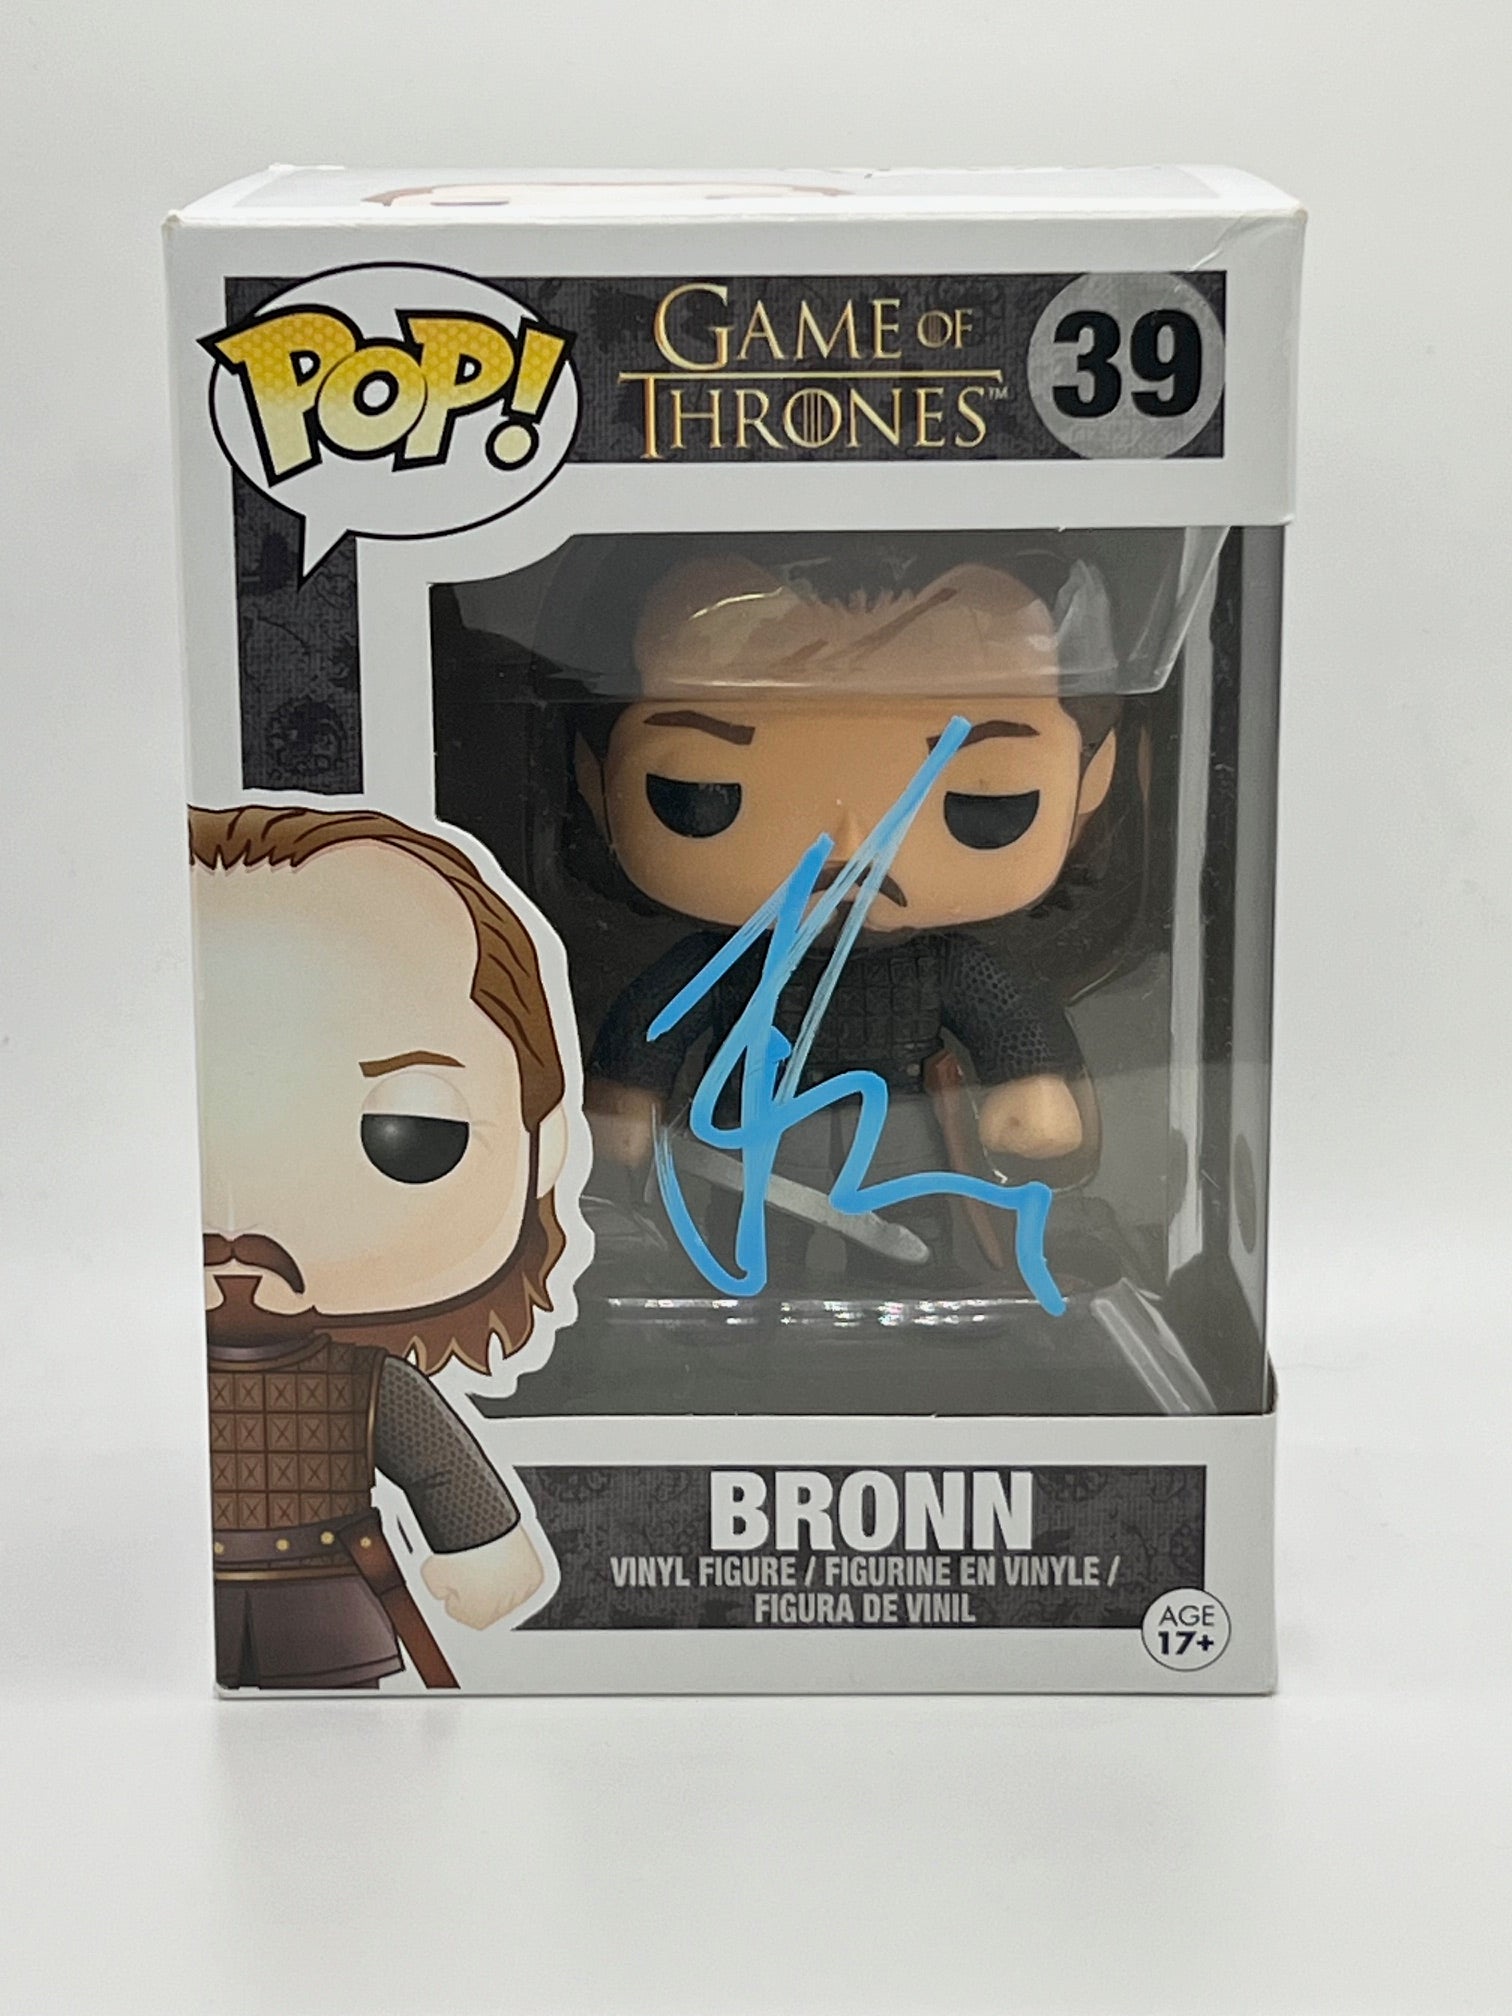 Jerome Flynn Bronn Game of Thrones Signed Autograph 8x10 Photo ACOA